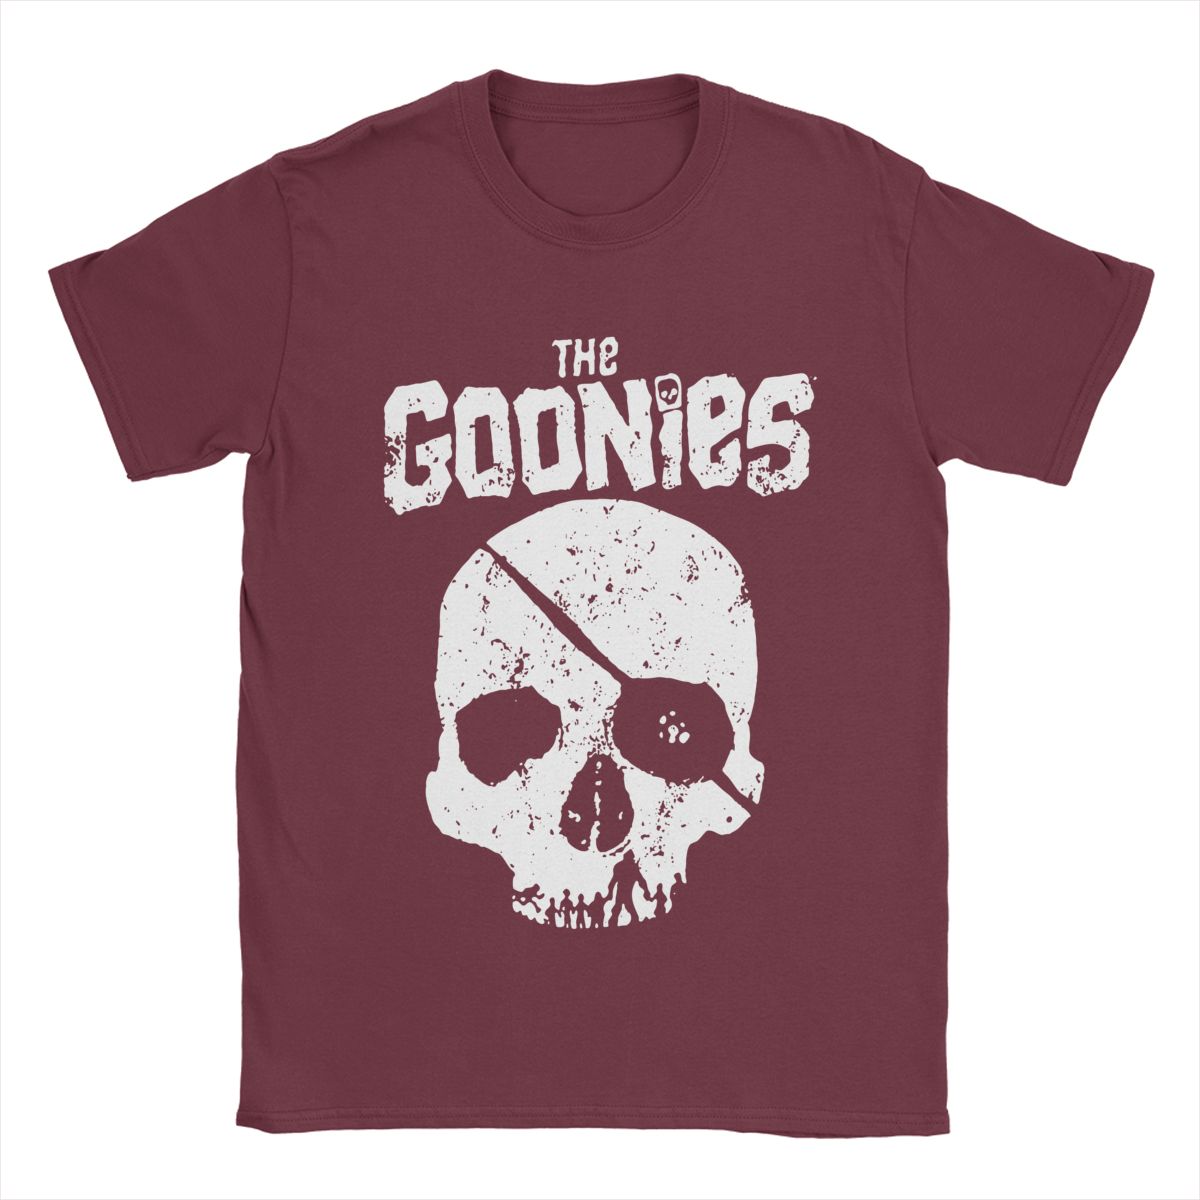 The Goonies - Classic 80s - Cult Childrens Movie - Vintage Film Lover T-Shirt-Burgundy-S-